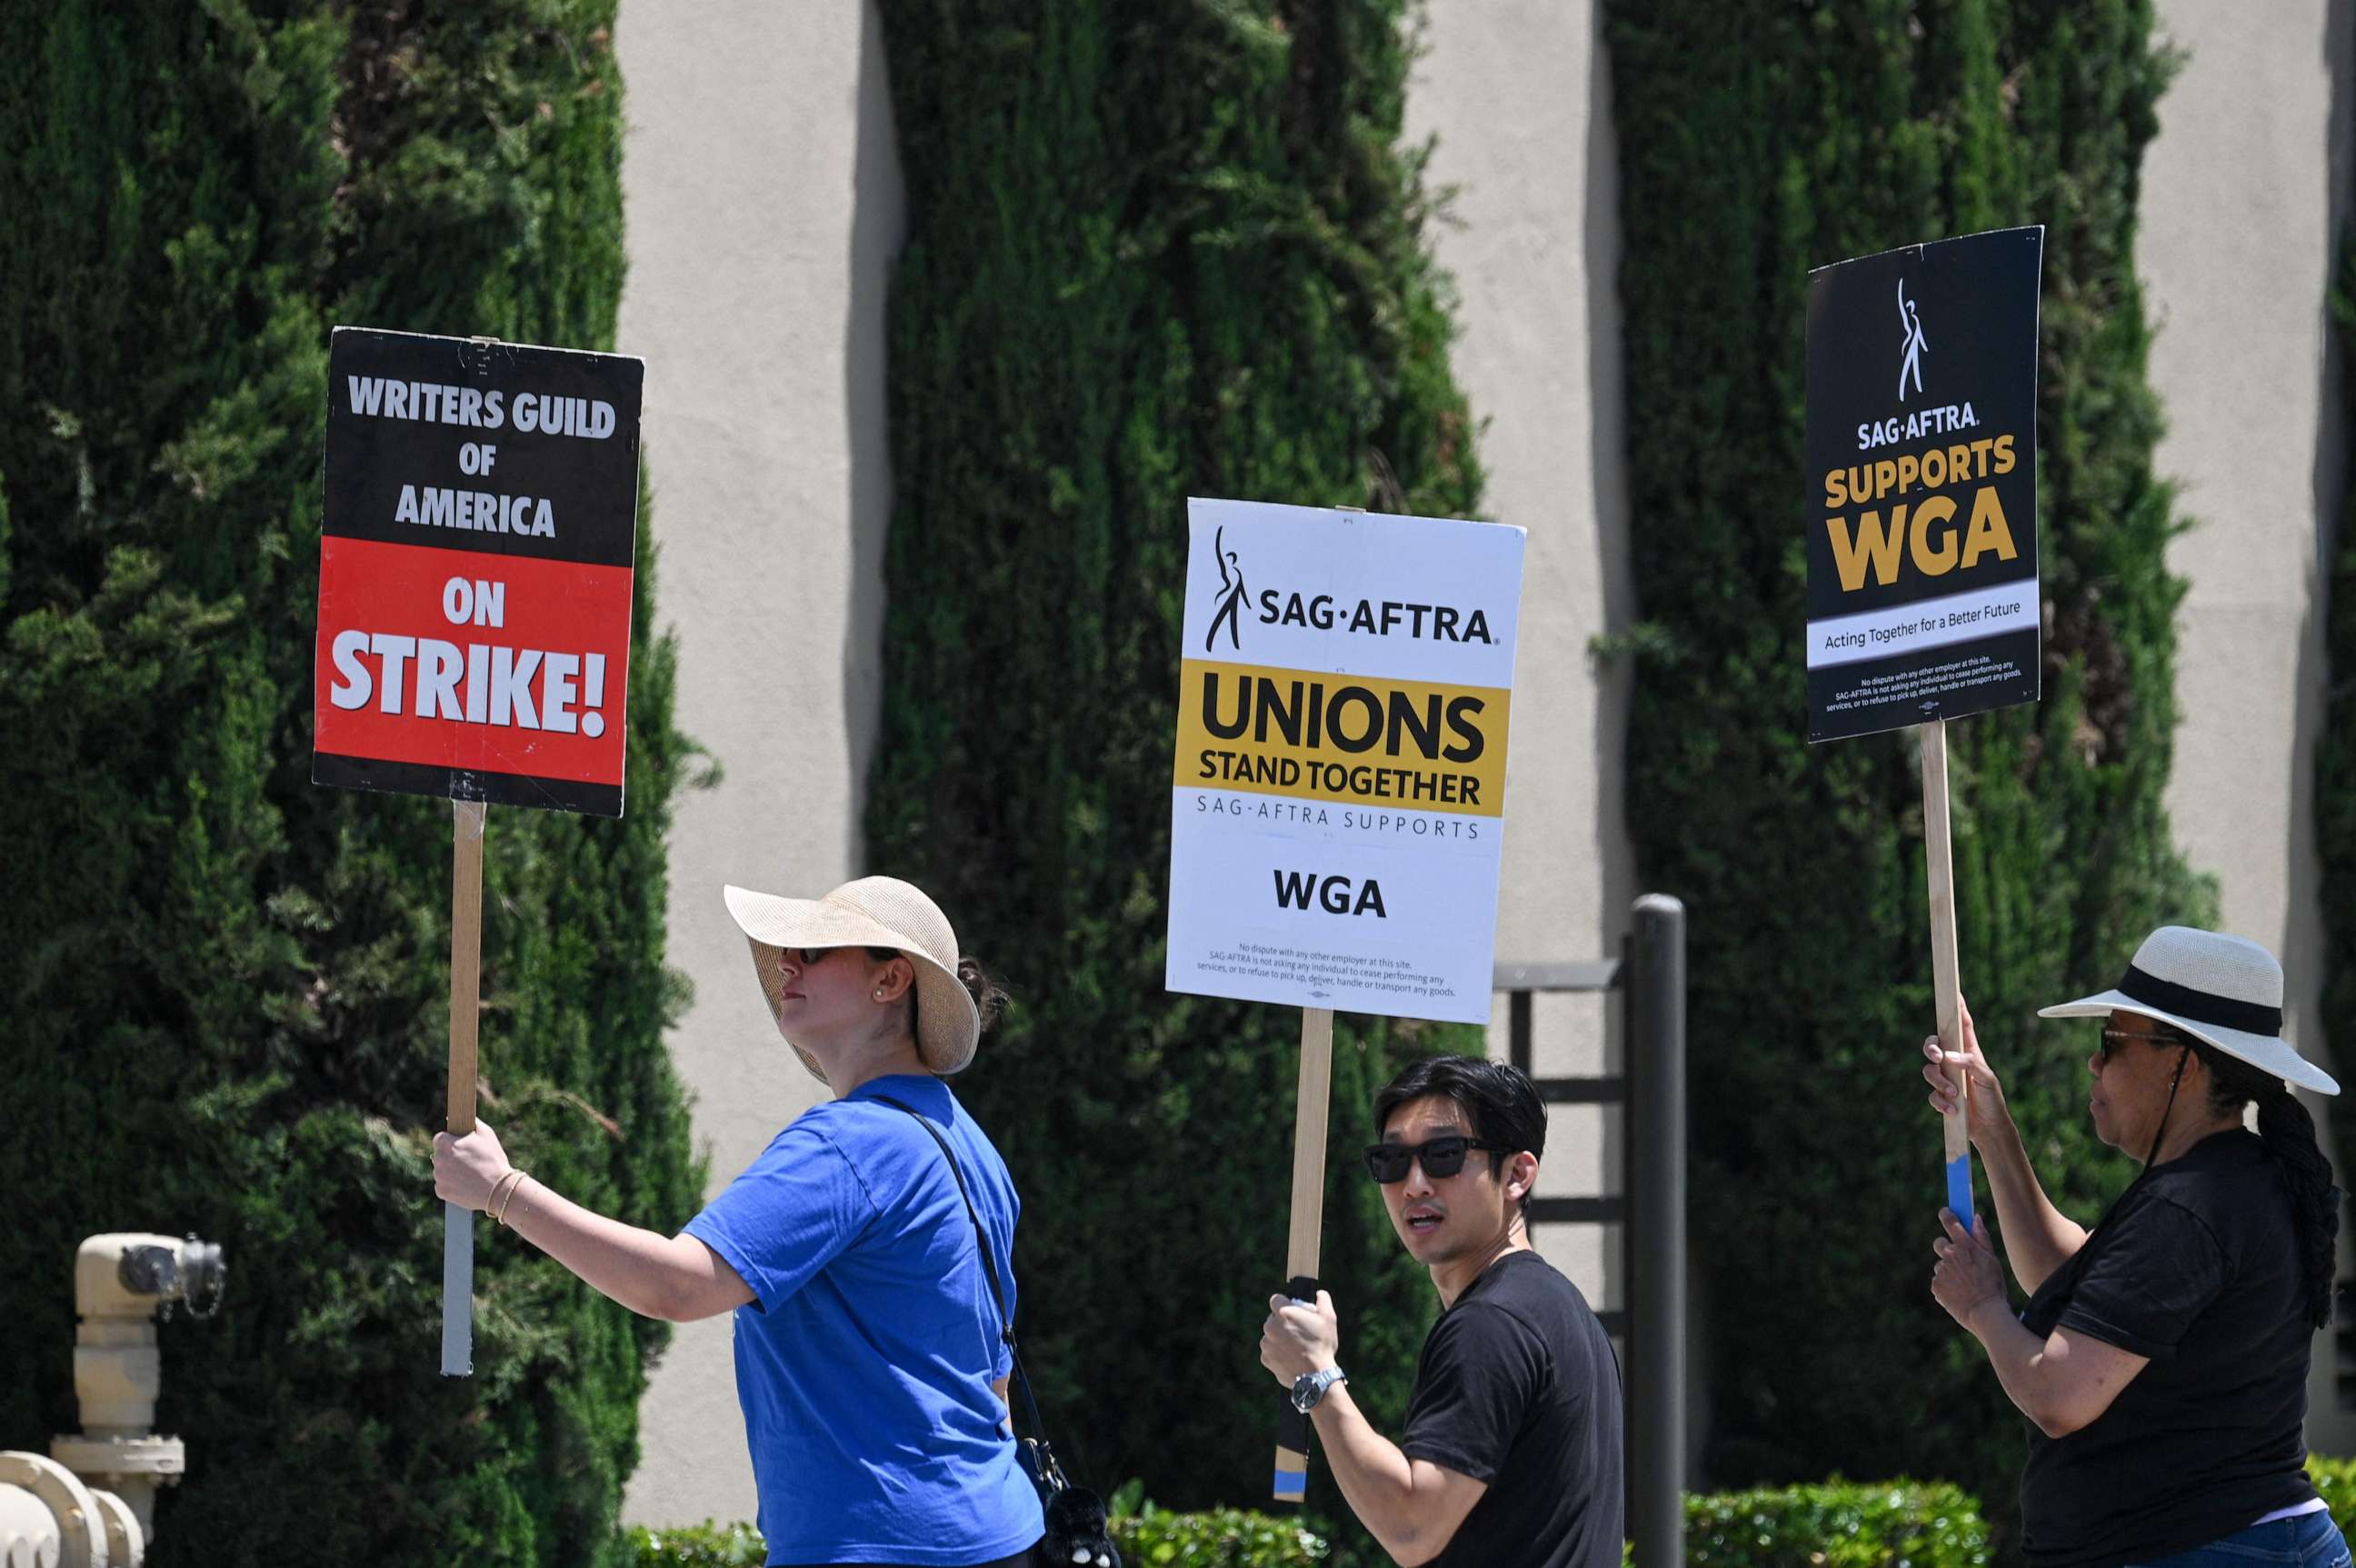 PHOTO: Hollywood writers and their supporters from the SAG AFTRA actors' union walk the picket line outside Warner Bros Studios in Burbank, California, June 30, 2023. (Photo by Robyn Beck / AFP) (Photo by ROBYN BECK/AFP via Getty Images)